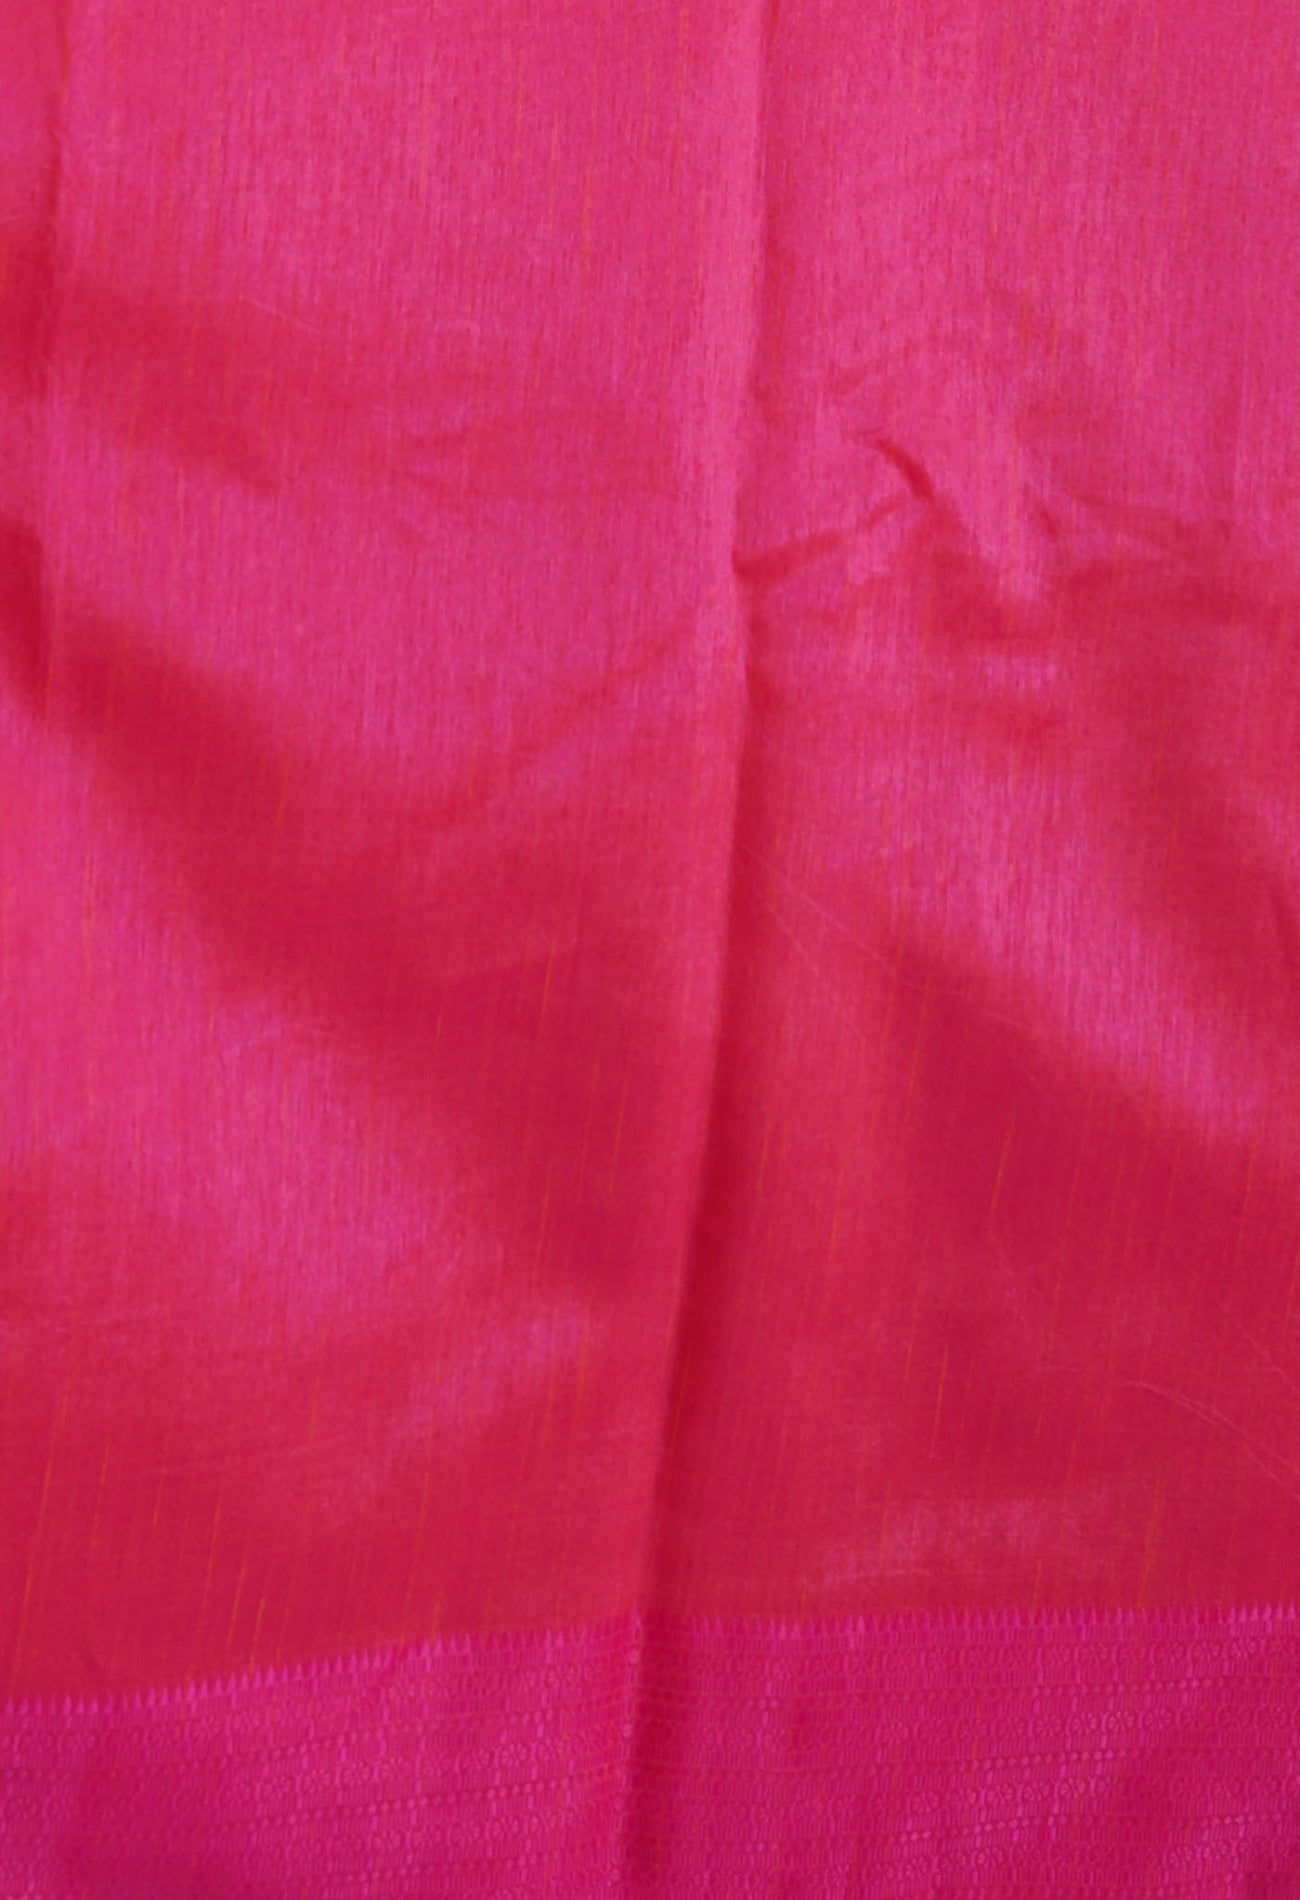 Online Shopping for Orange-Pink  Mysore Sico Saree with Fancy/Ethnic Prints from Karnataka at Unnatisilks.com India
